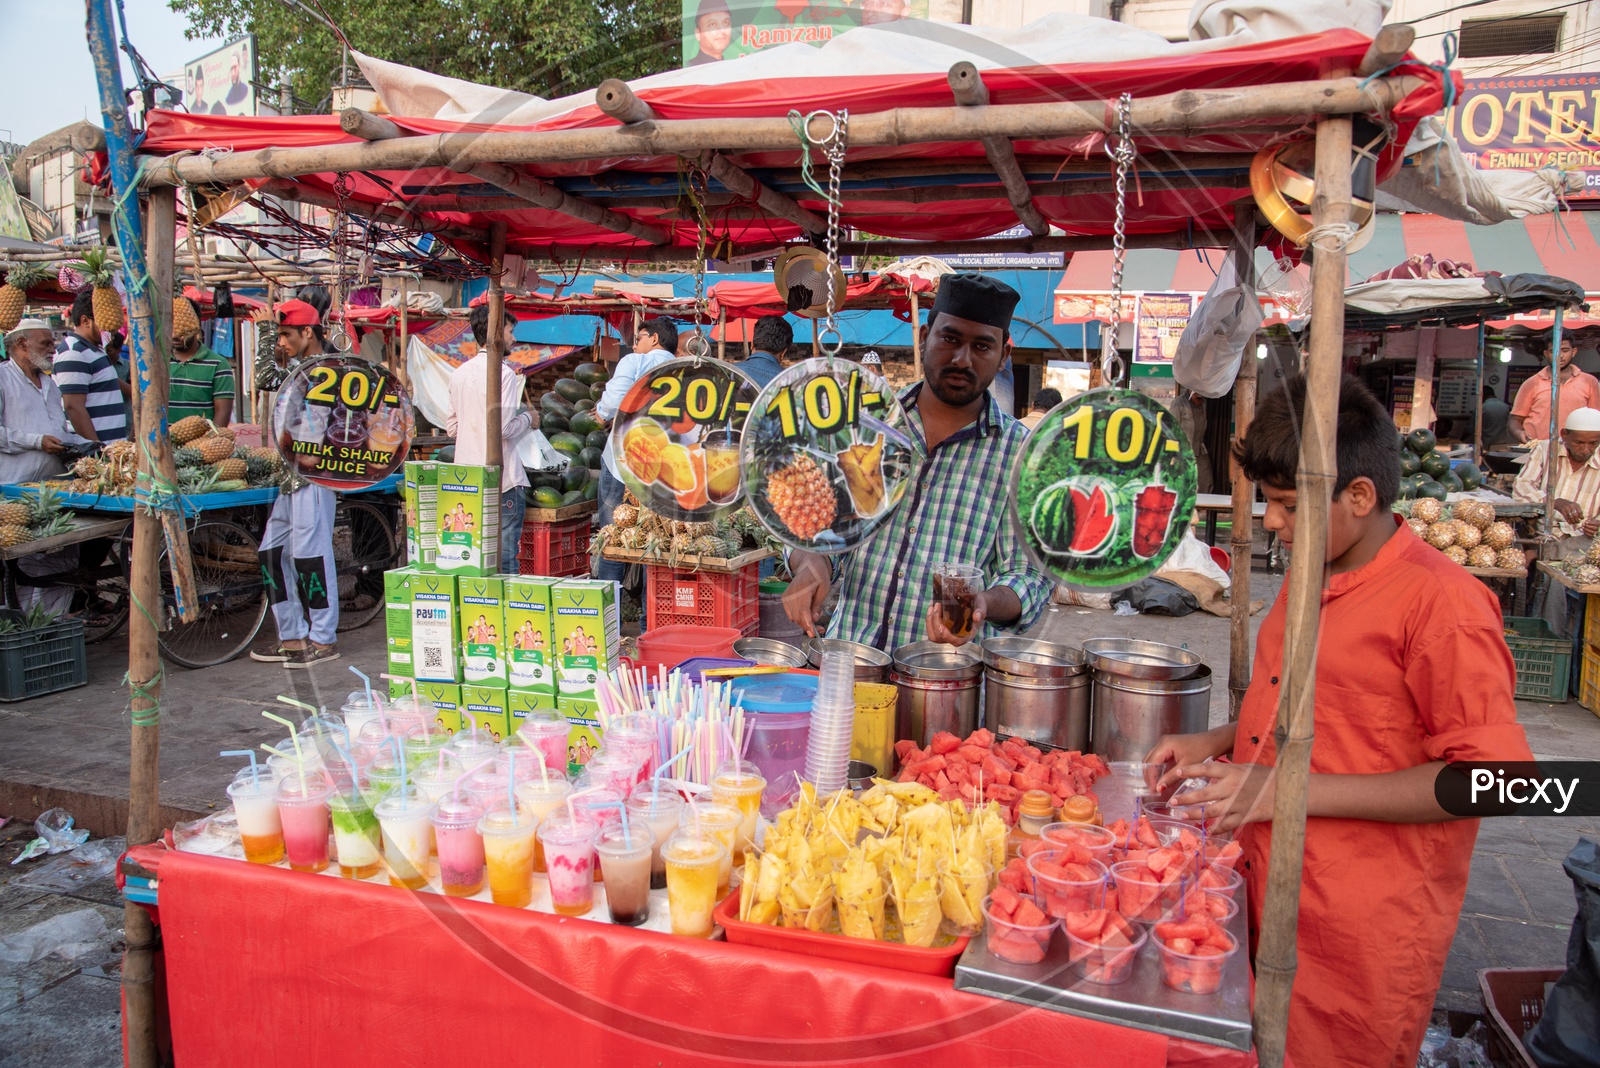 Fruits & Fruit Drinks for sale for breaking fast during Ramadan